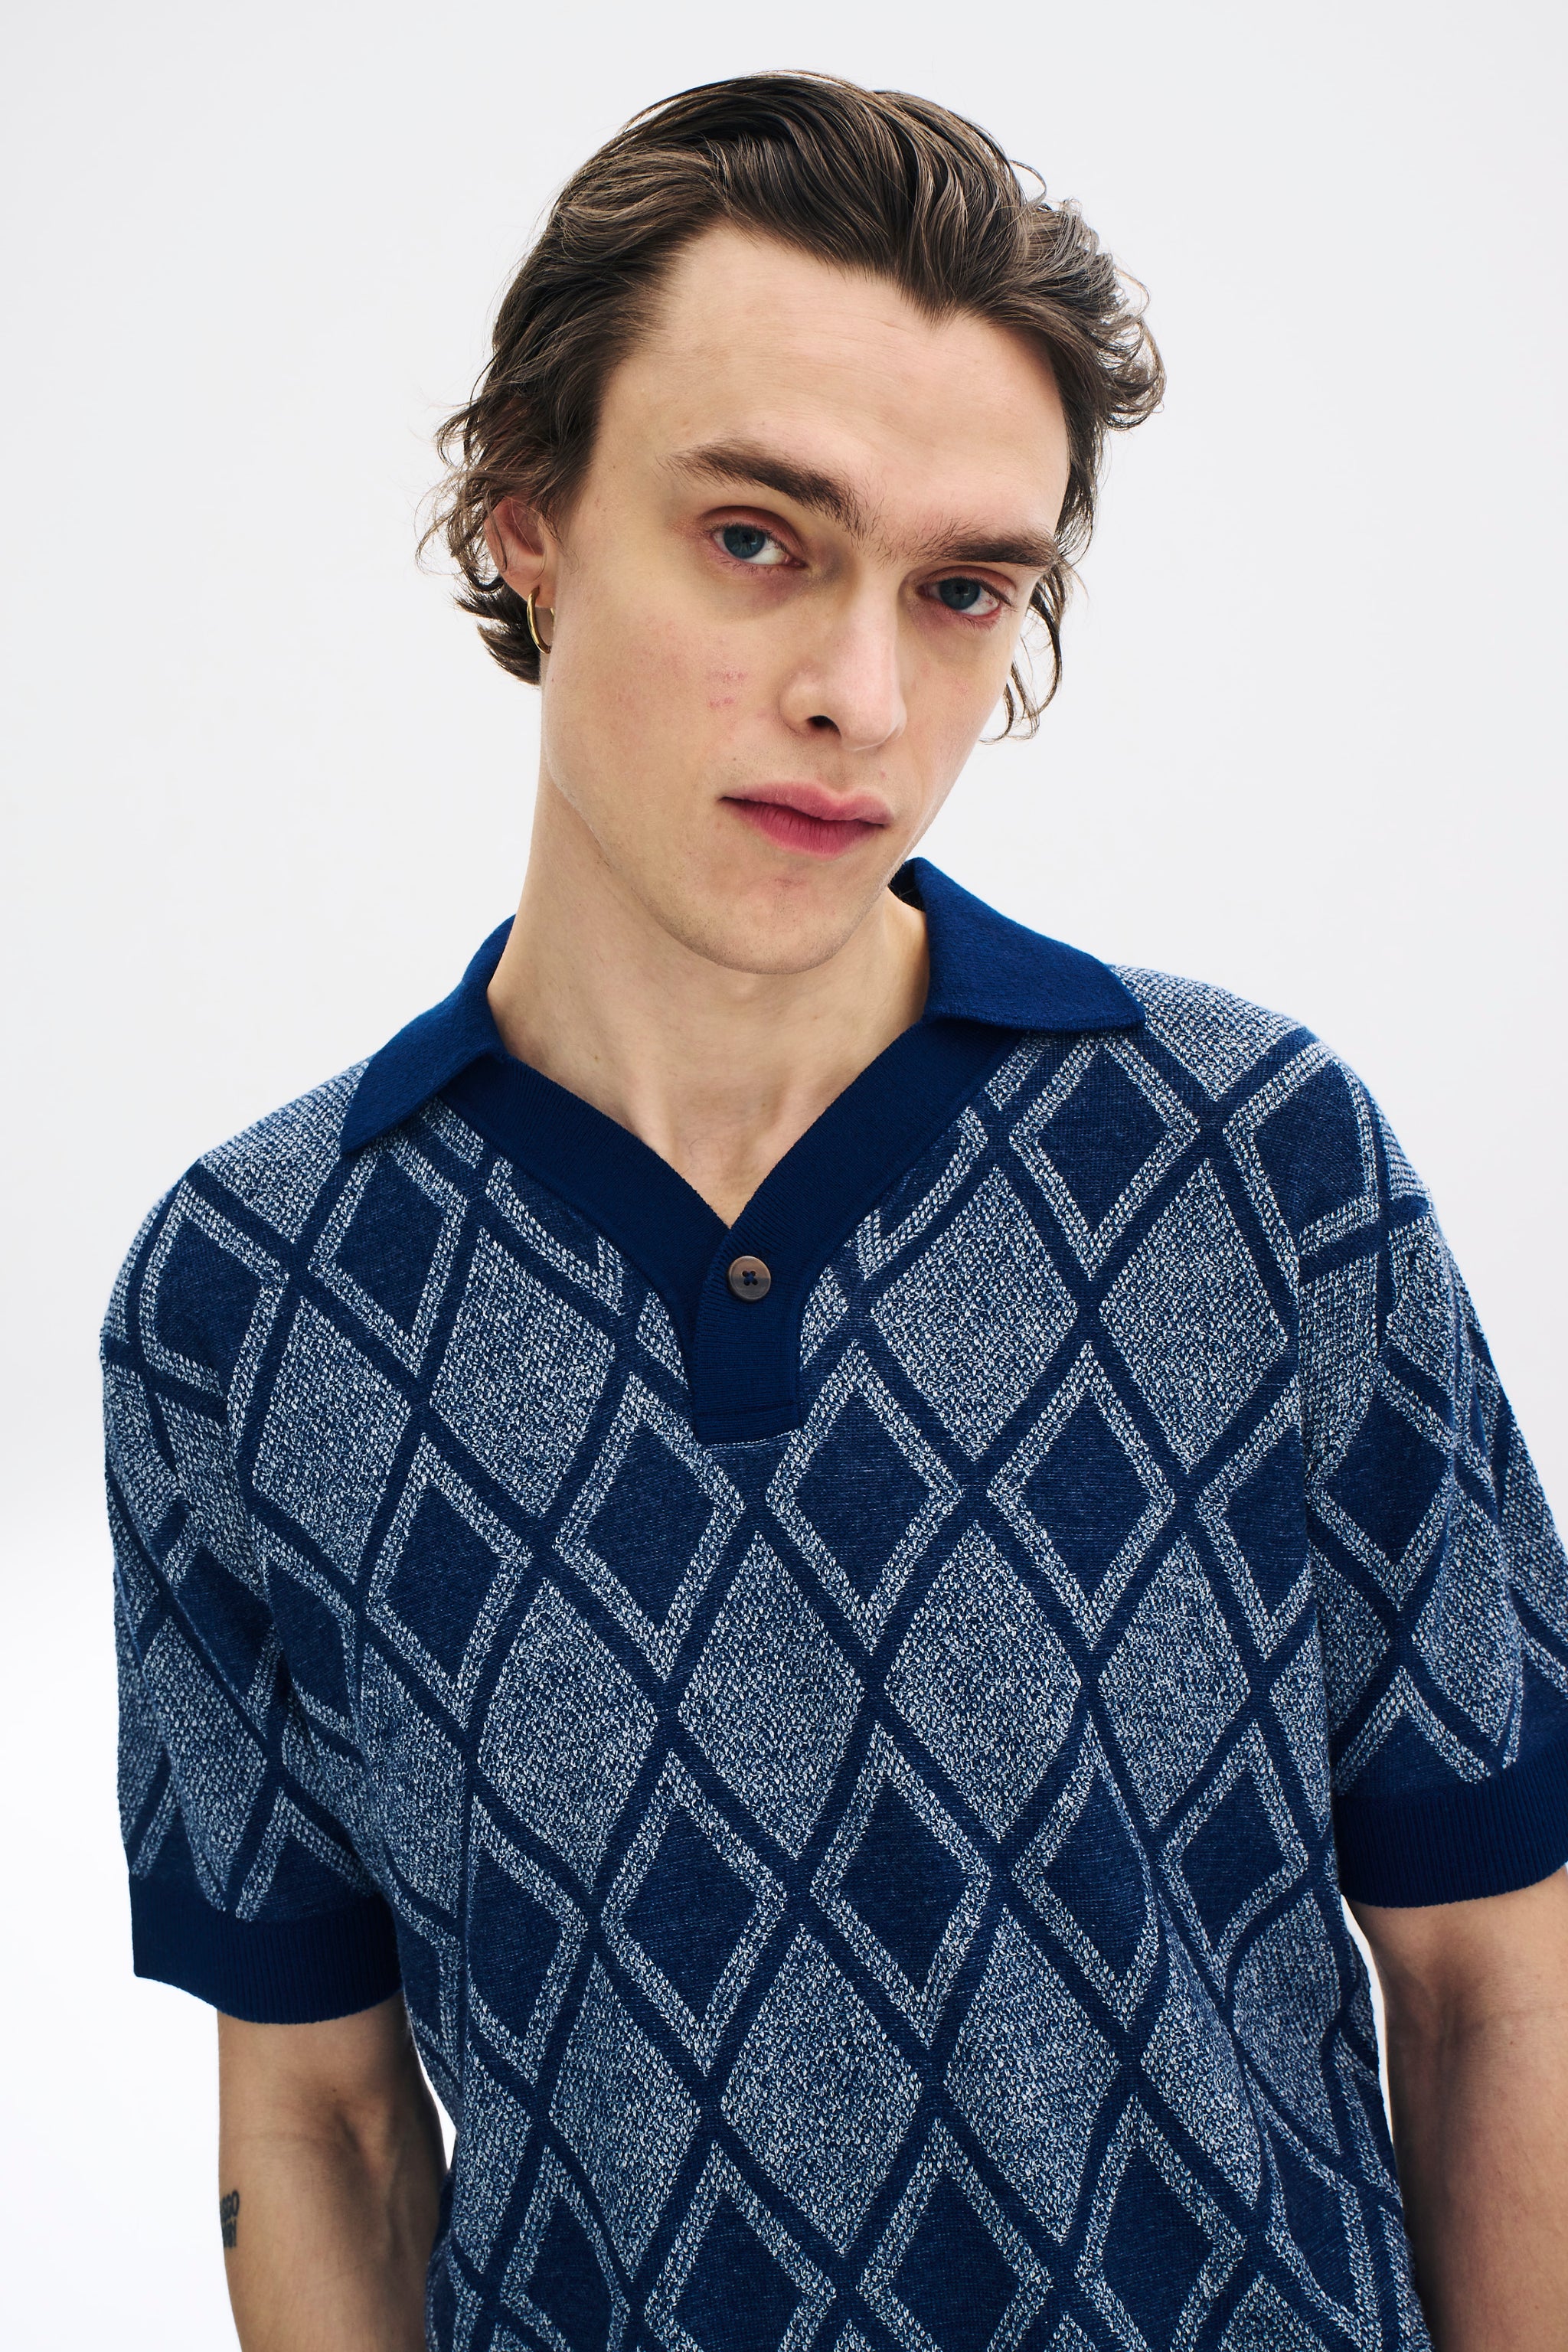 Argyle Wool Polo Shirt in Blue - King Tuckfield